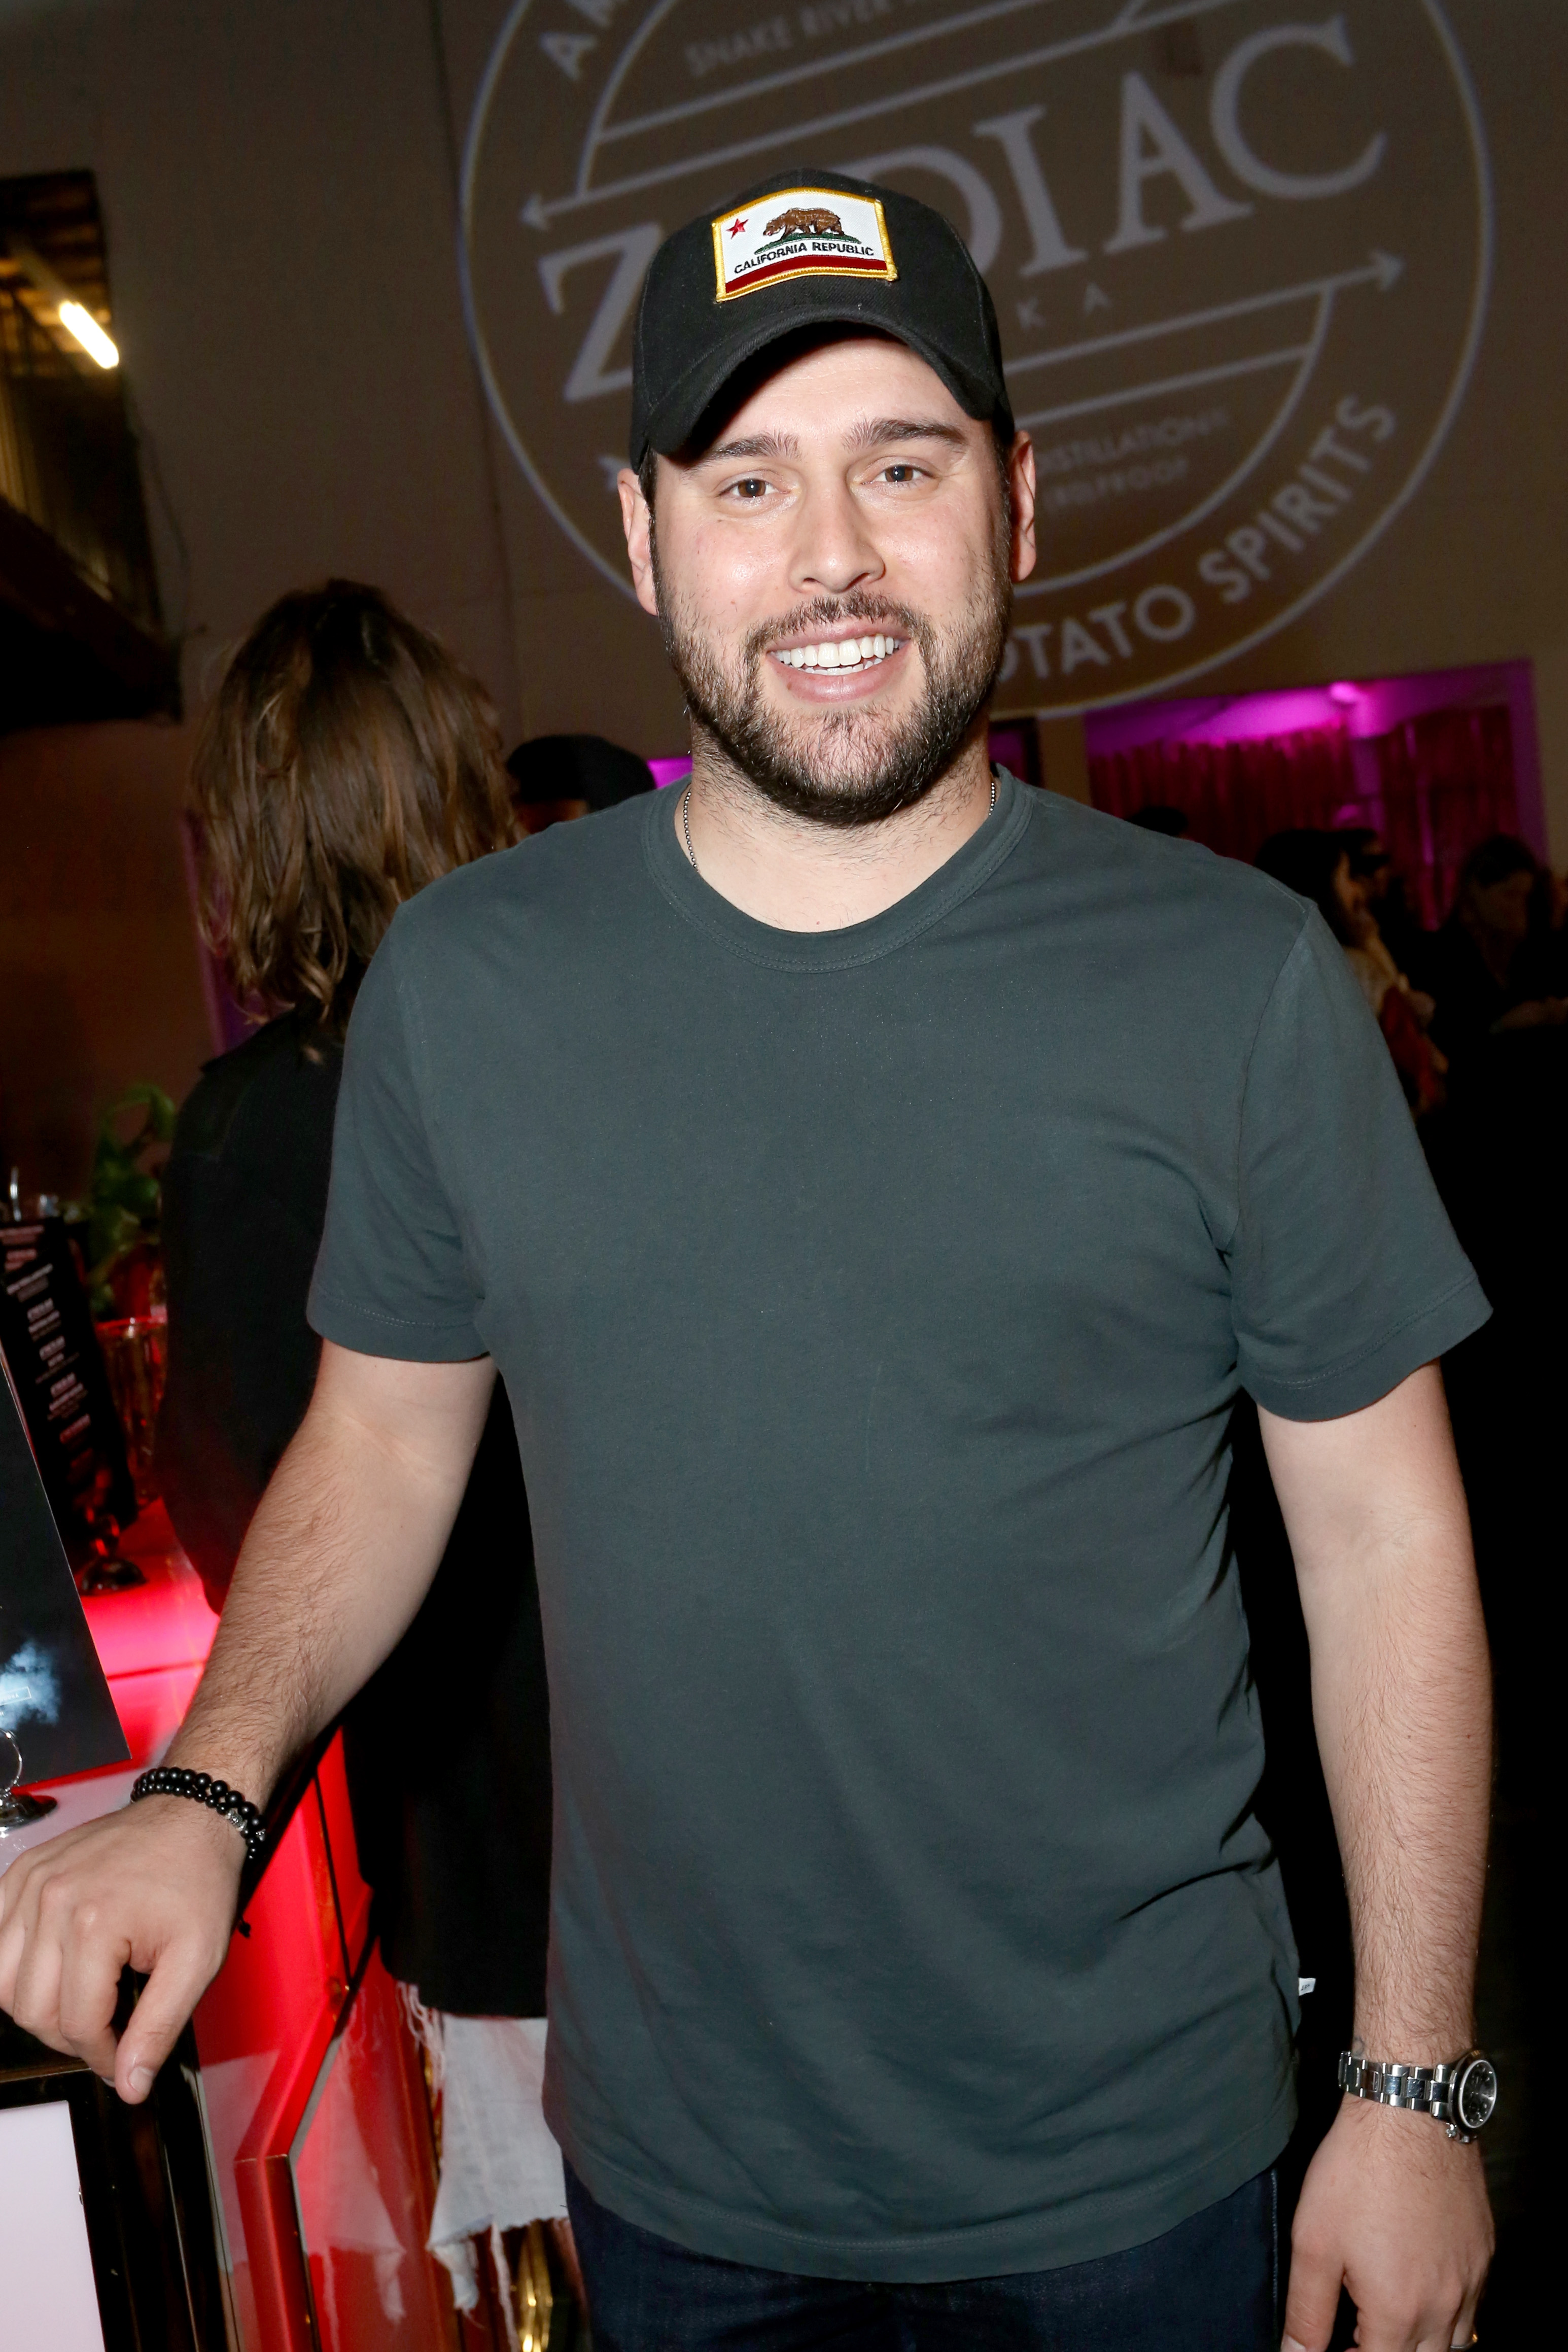 LOS ANGELES, CA - MAY 04:  Talent manager Scooter Braun hosts an exclusive launch party introducing Zodiac Vodka to the California market, hosted by Zodiac Vodka and Scooter Braun, on May 4, 2015 in Los Angeles, California.  (Photo by Rachel Murray/Getty Images for Zodiac Vodka)